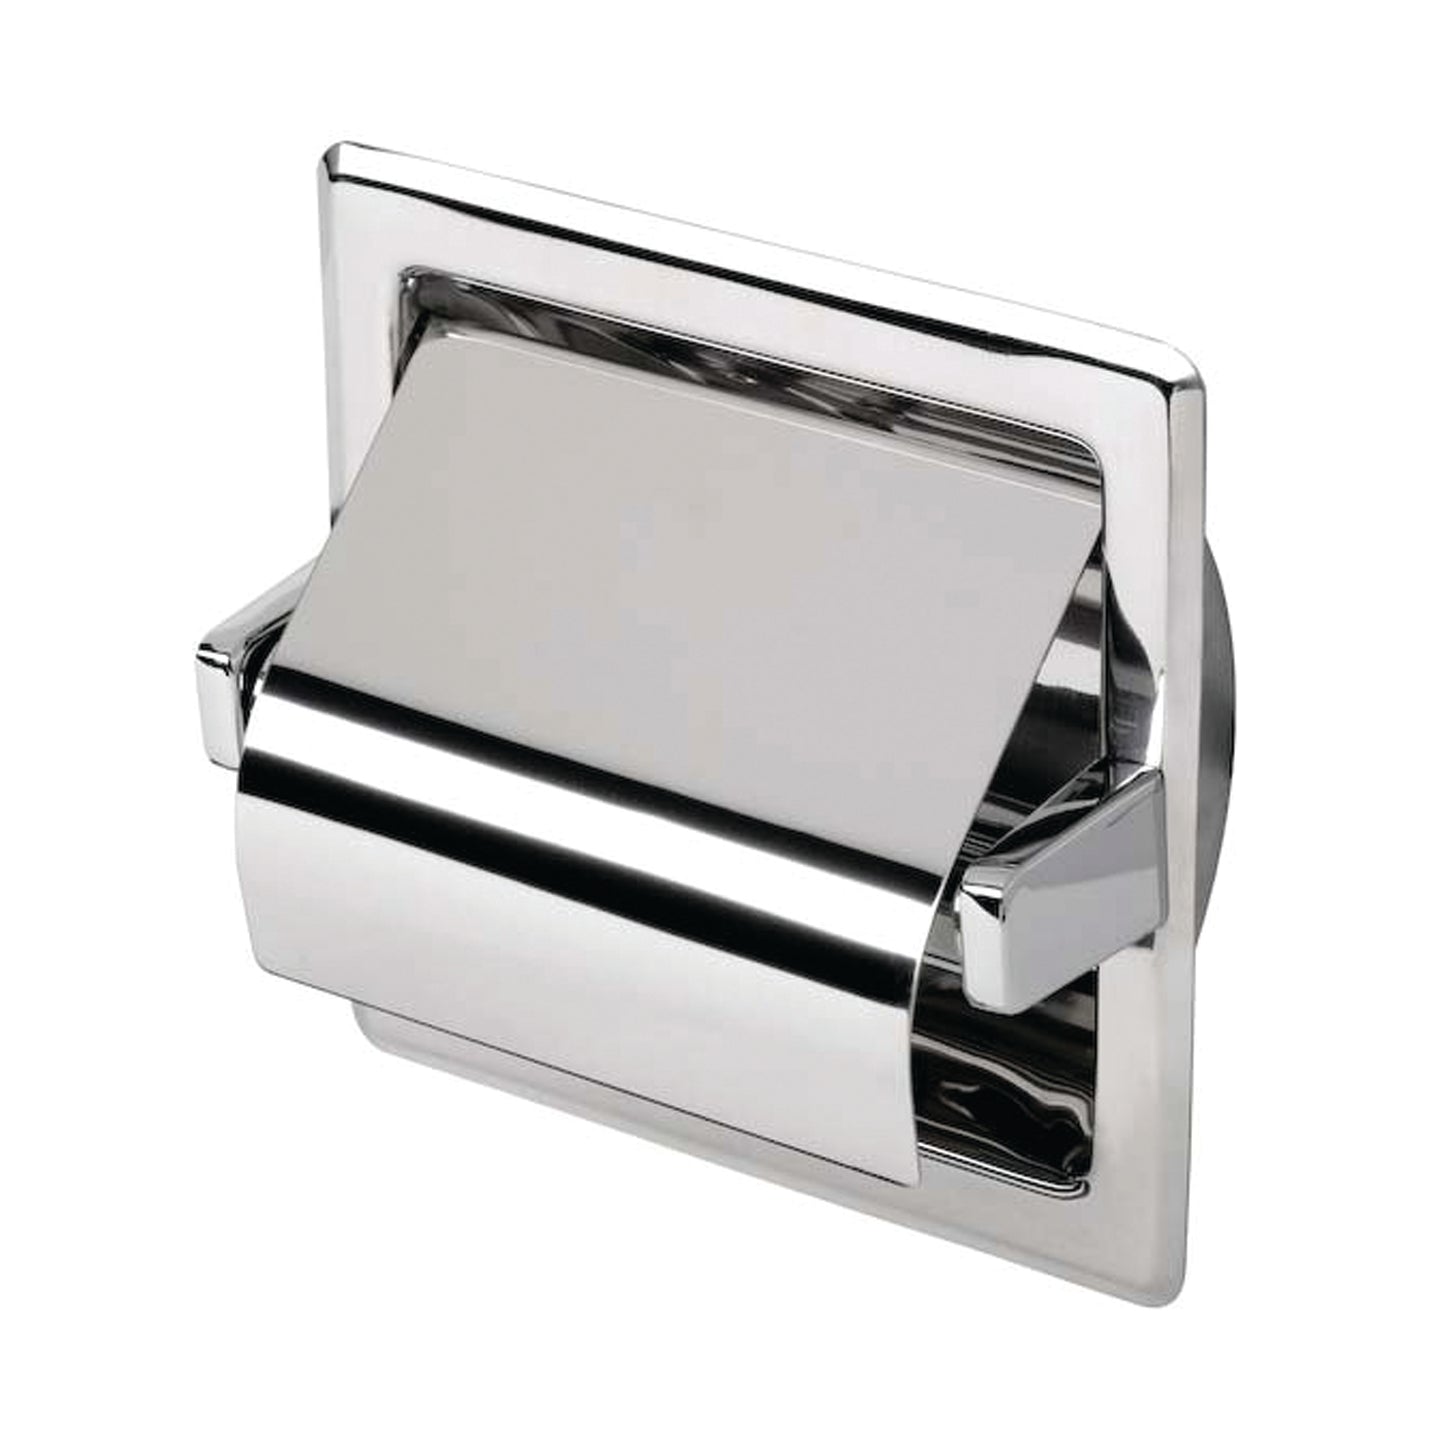 Geesa Hotel Recessed Roll Holder With Lid 119